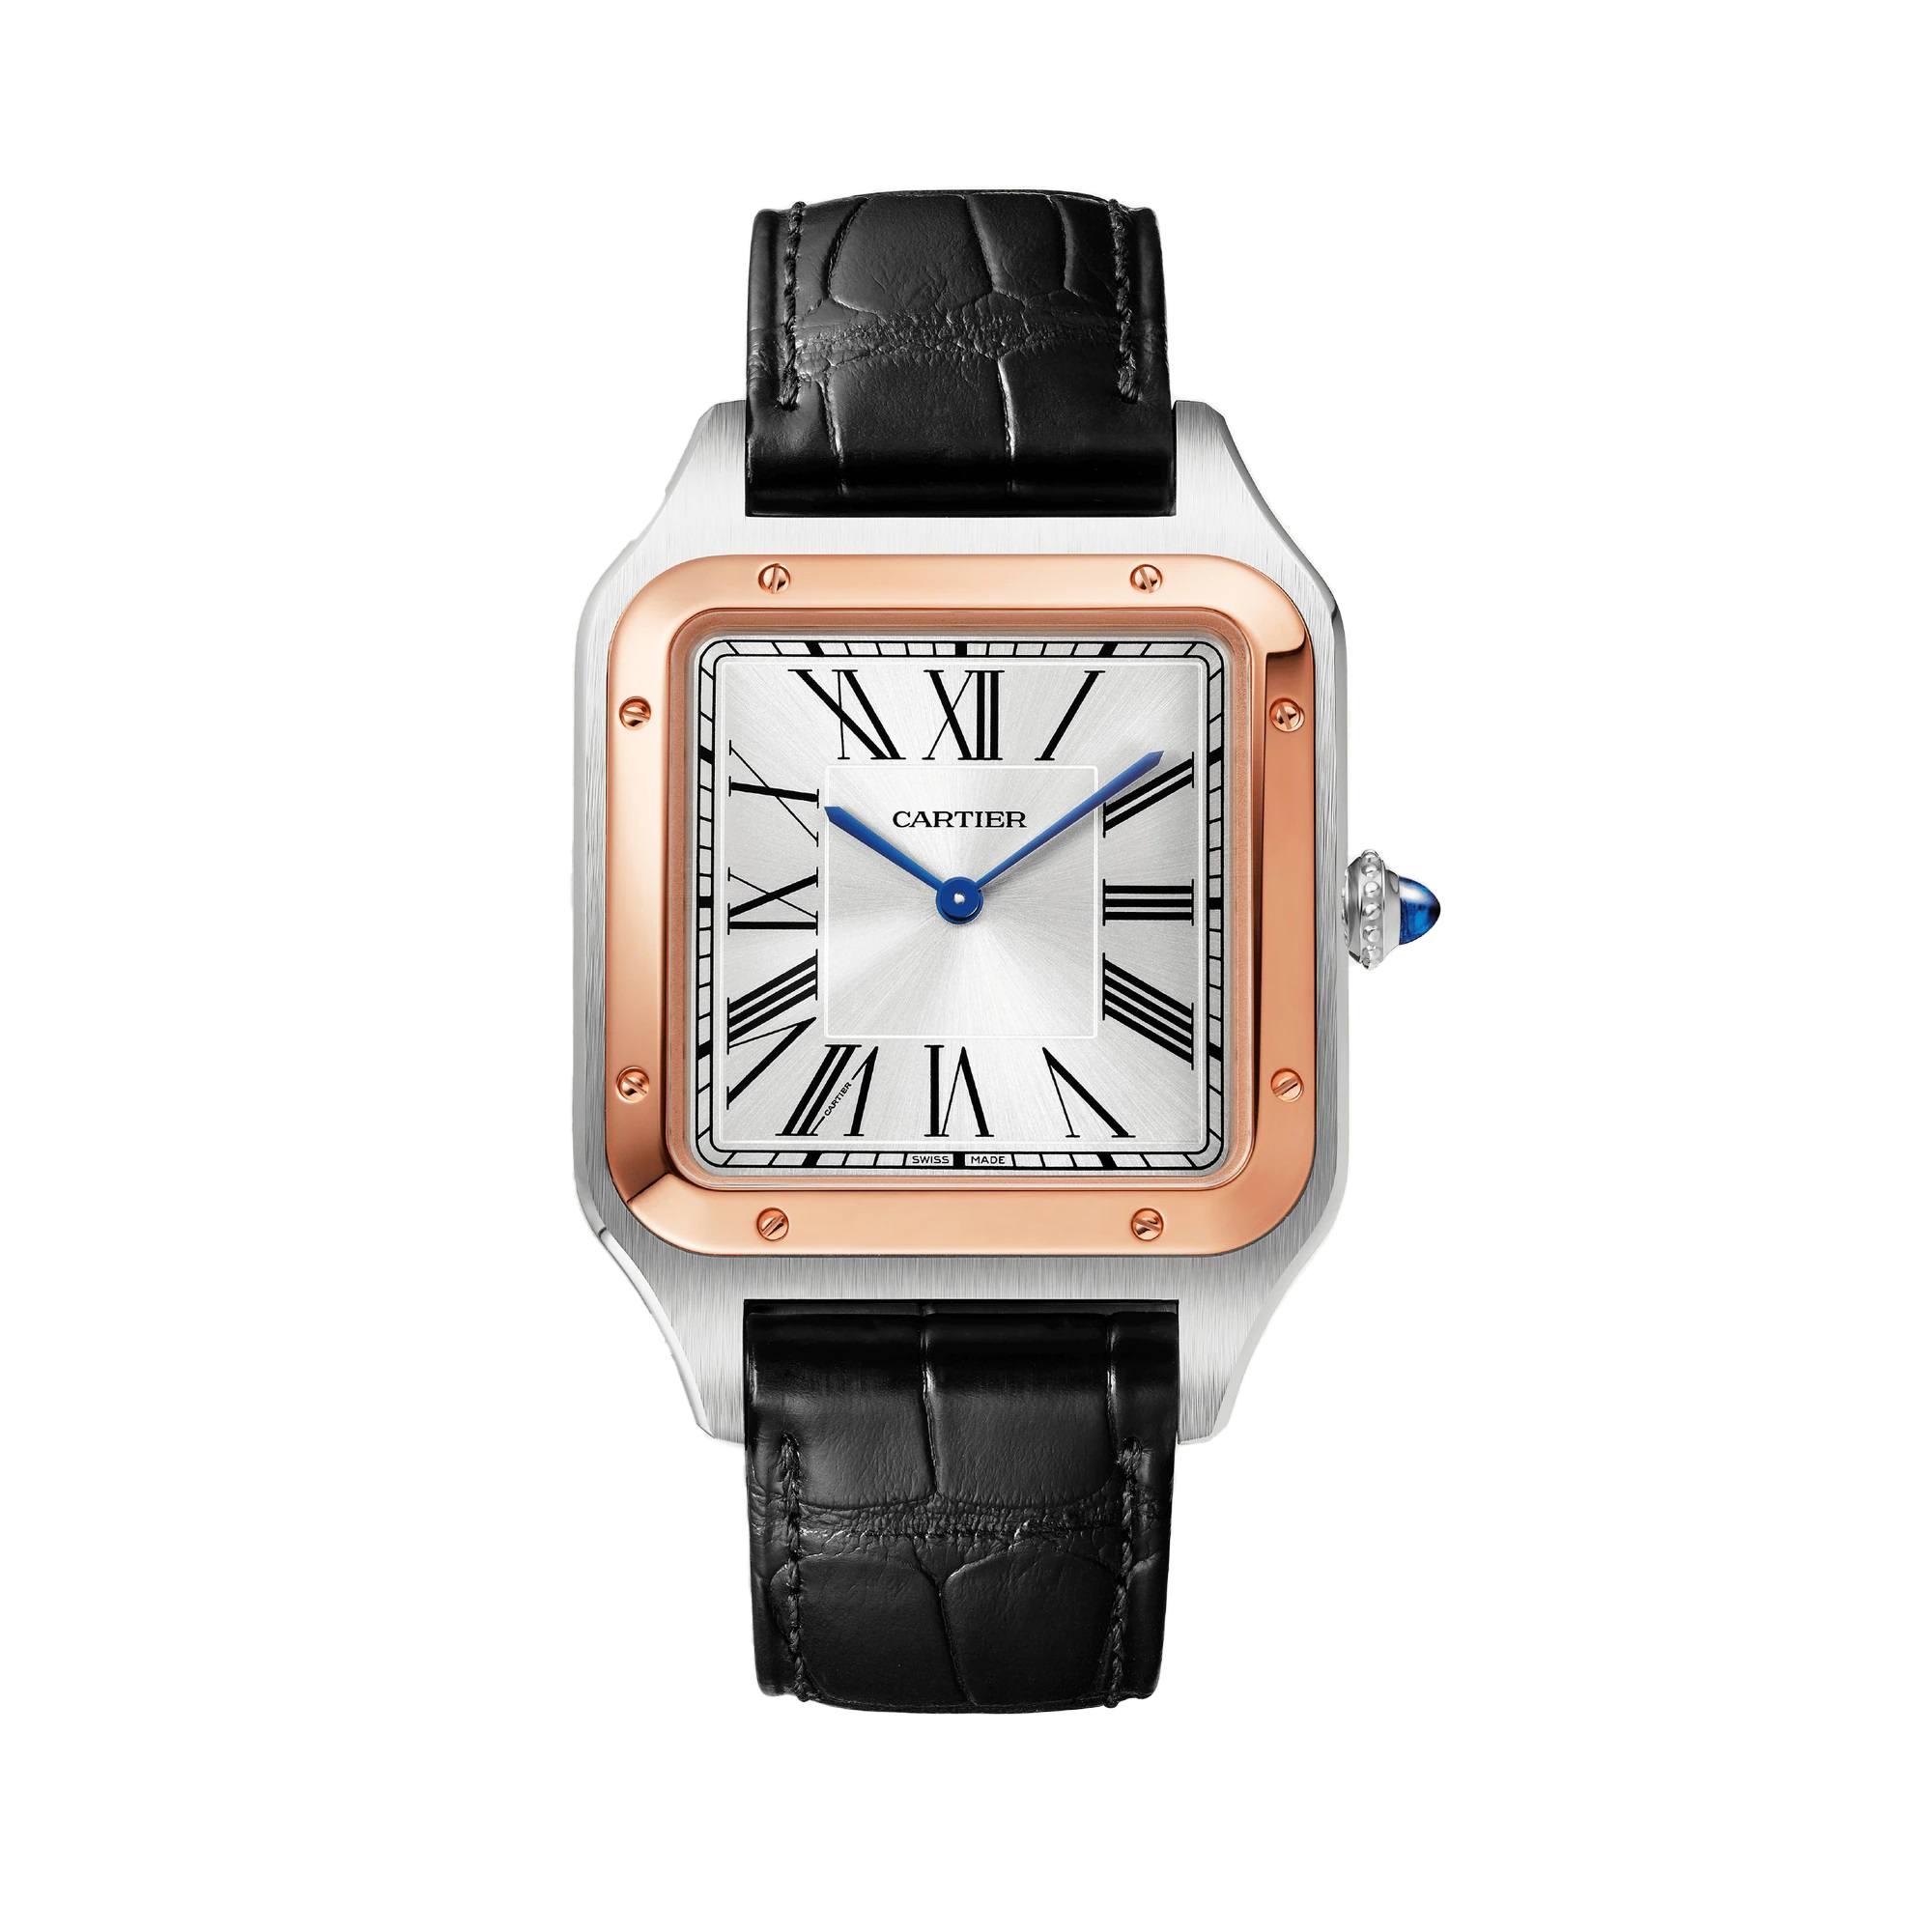 Cartier Santos-Dumont Watch in Rose Gold with Black Alligator Strap, extra large model 1